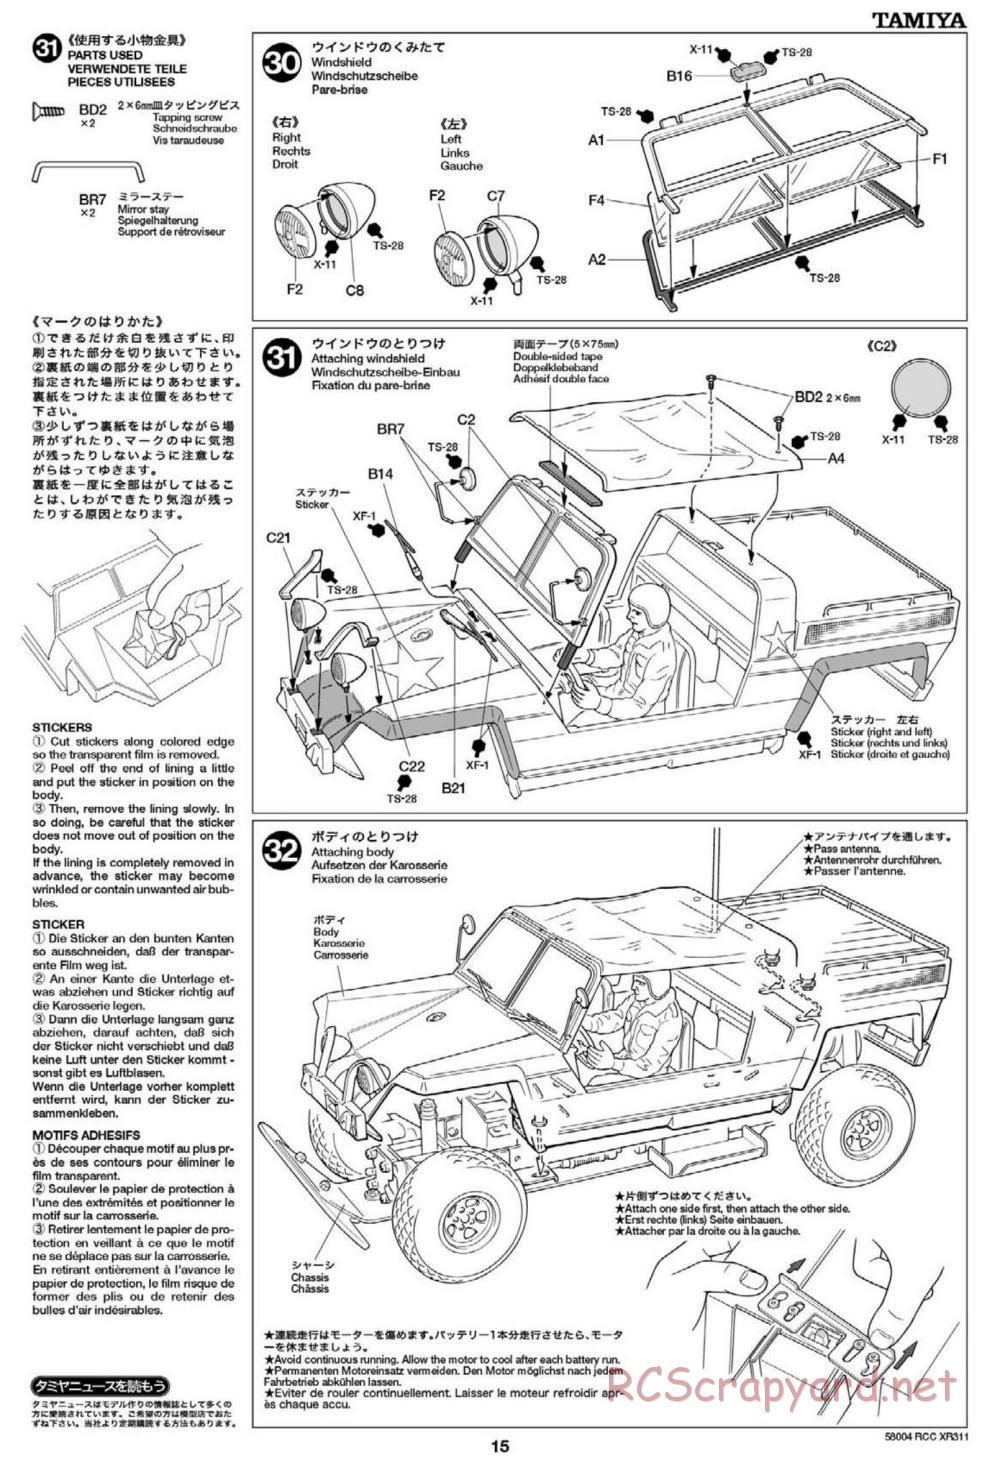 Tamiya - XR311 Combat Support Vehicle (2012) Chassis - Manual - Page 15